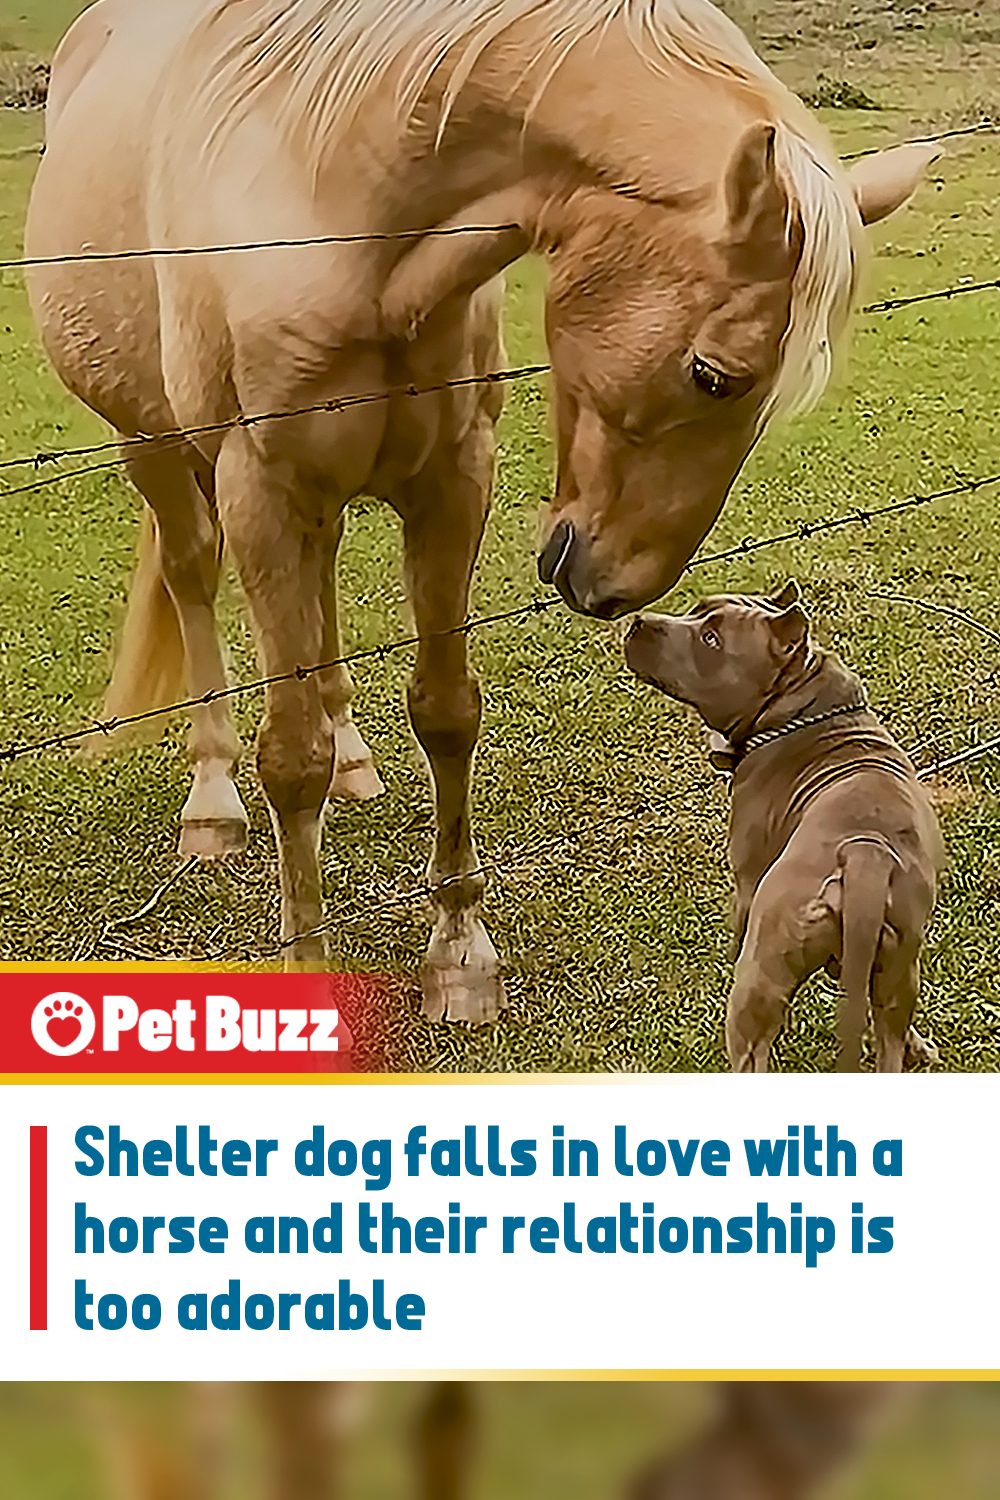 Shelter dog falls in love with a horse and their relationship is too adorable